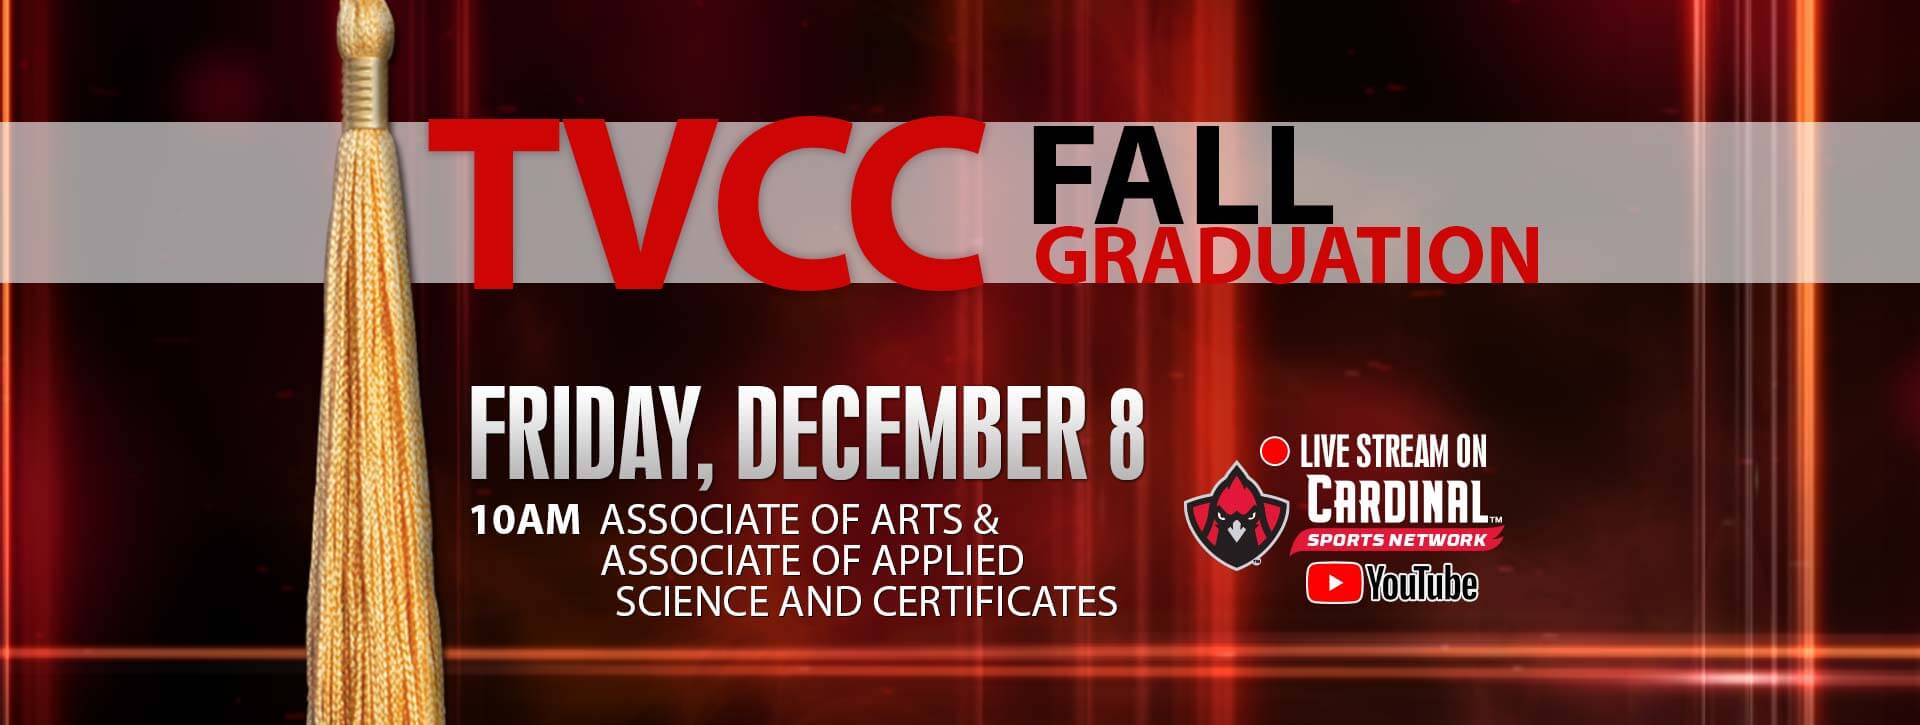 TVCC Fall Graduation, Friday, December 8.  10AM - Associate of Arts & Associate of Applied Science and Certificates. Live Stream on Cardinal Sports Network YouTube channel.